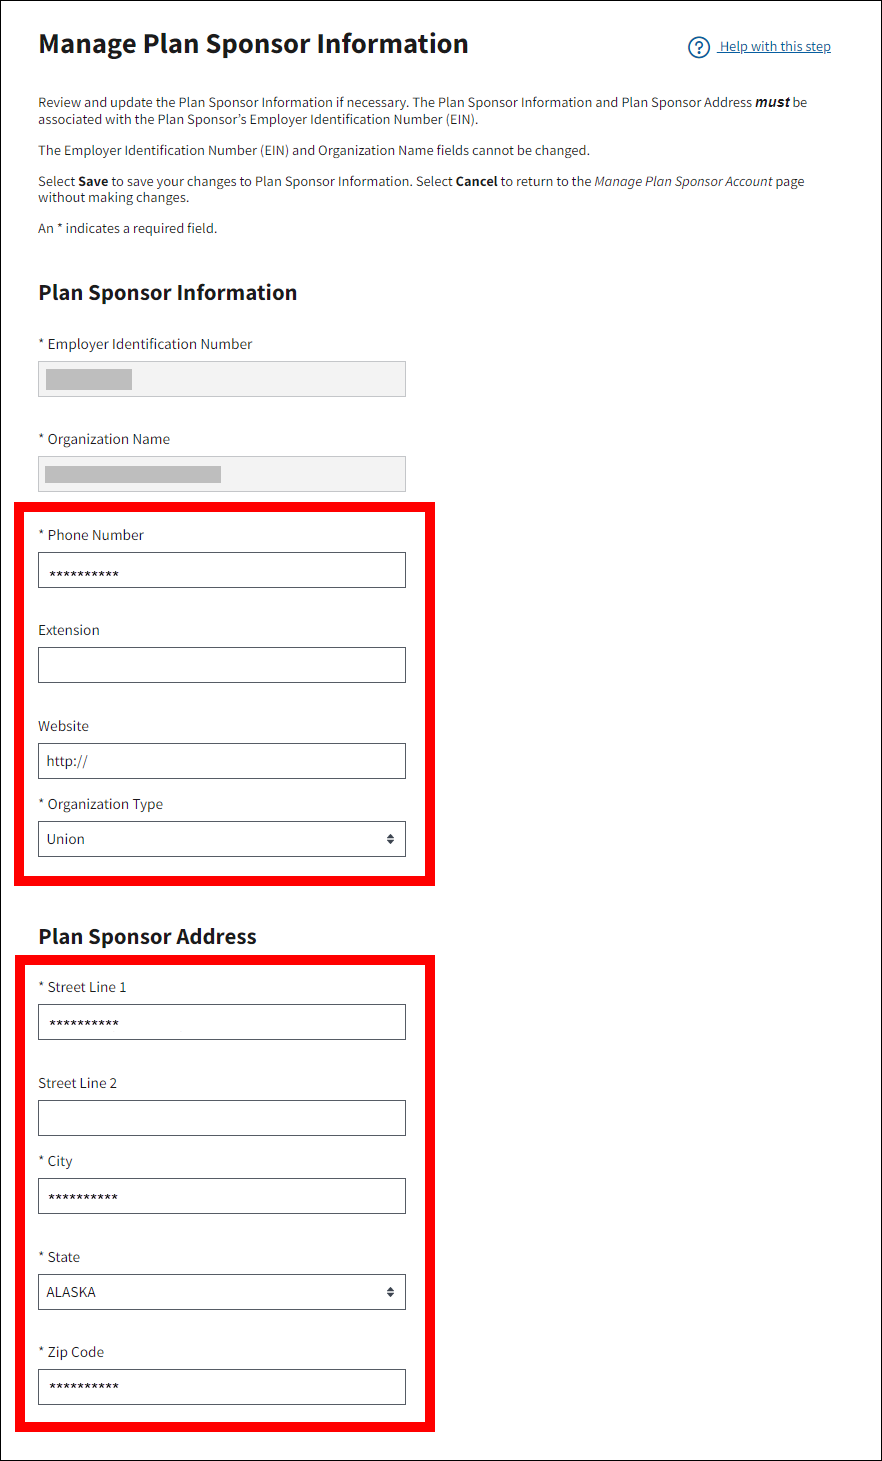 Manage Plan Sponsor Information page with form fields highlighted, and sample form data.